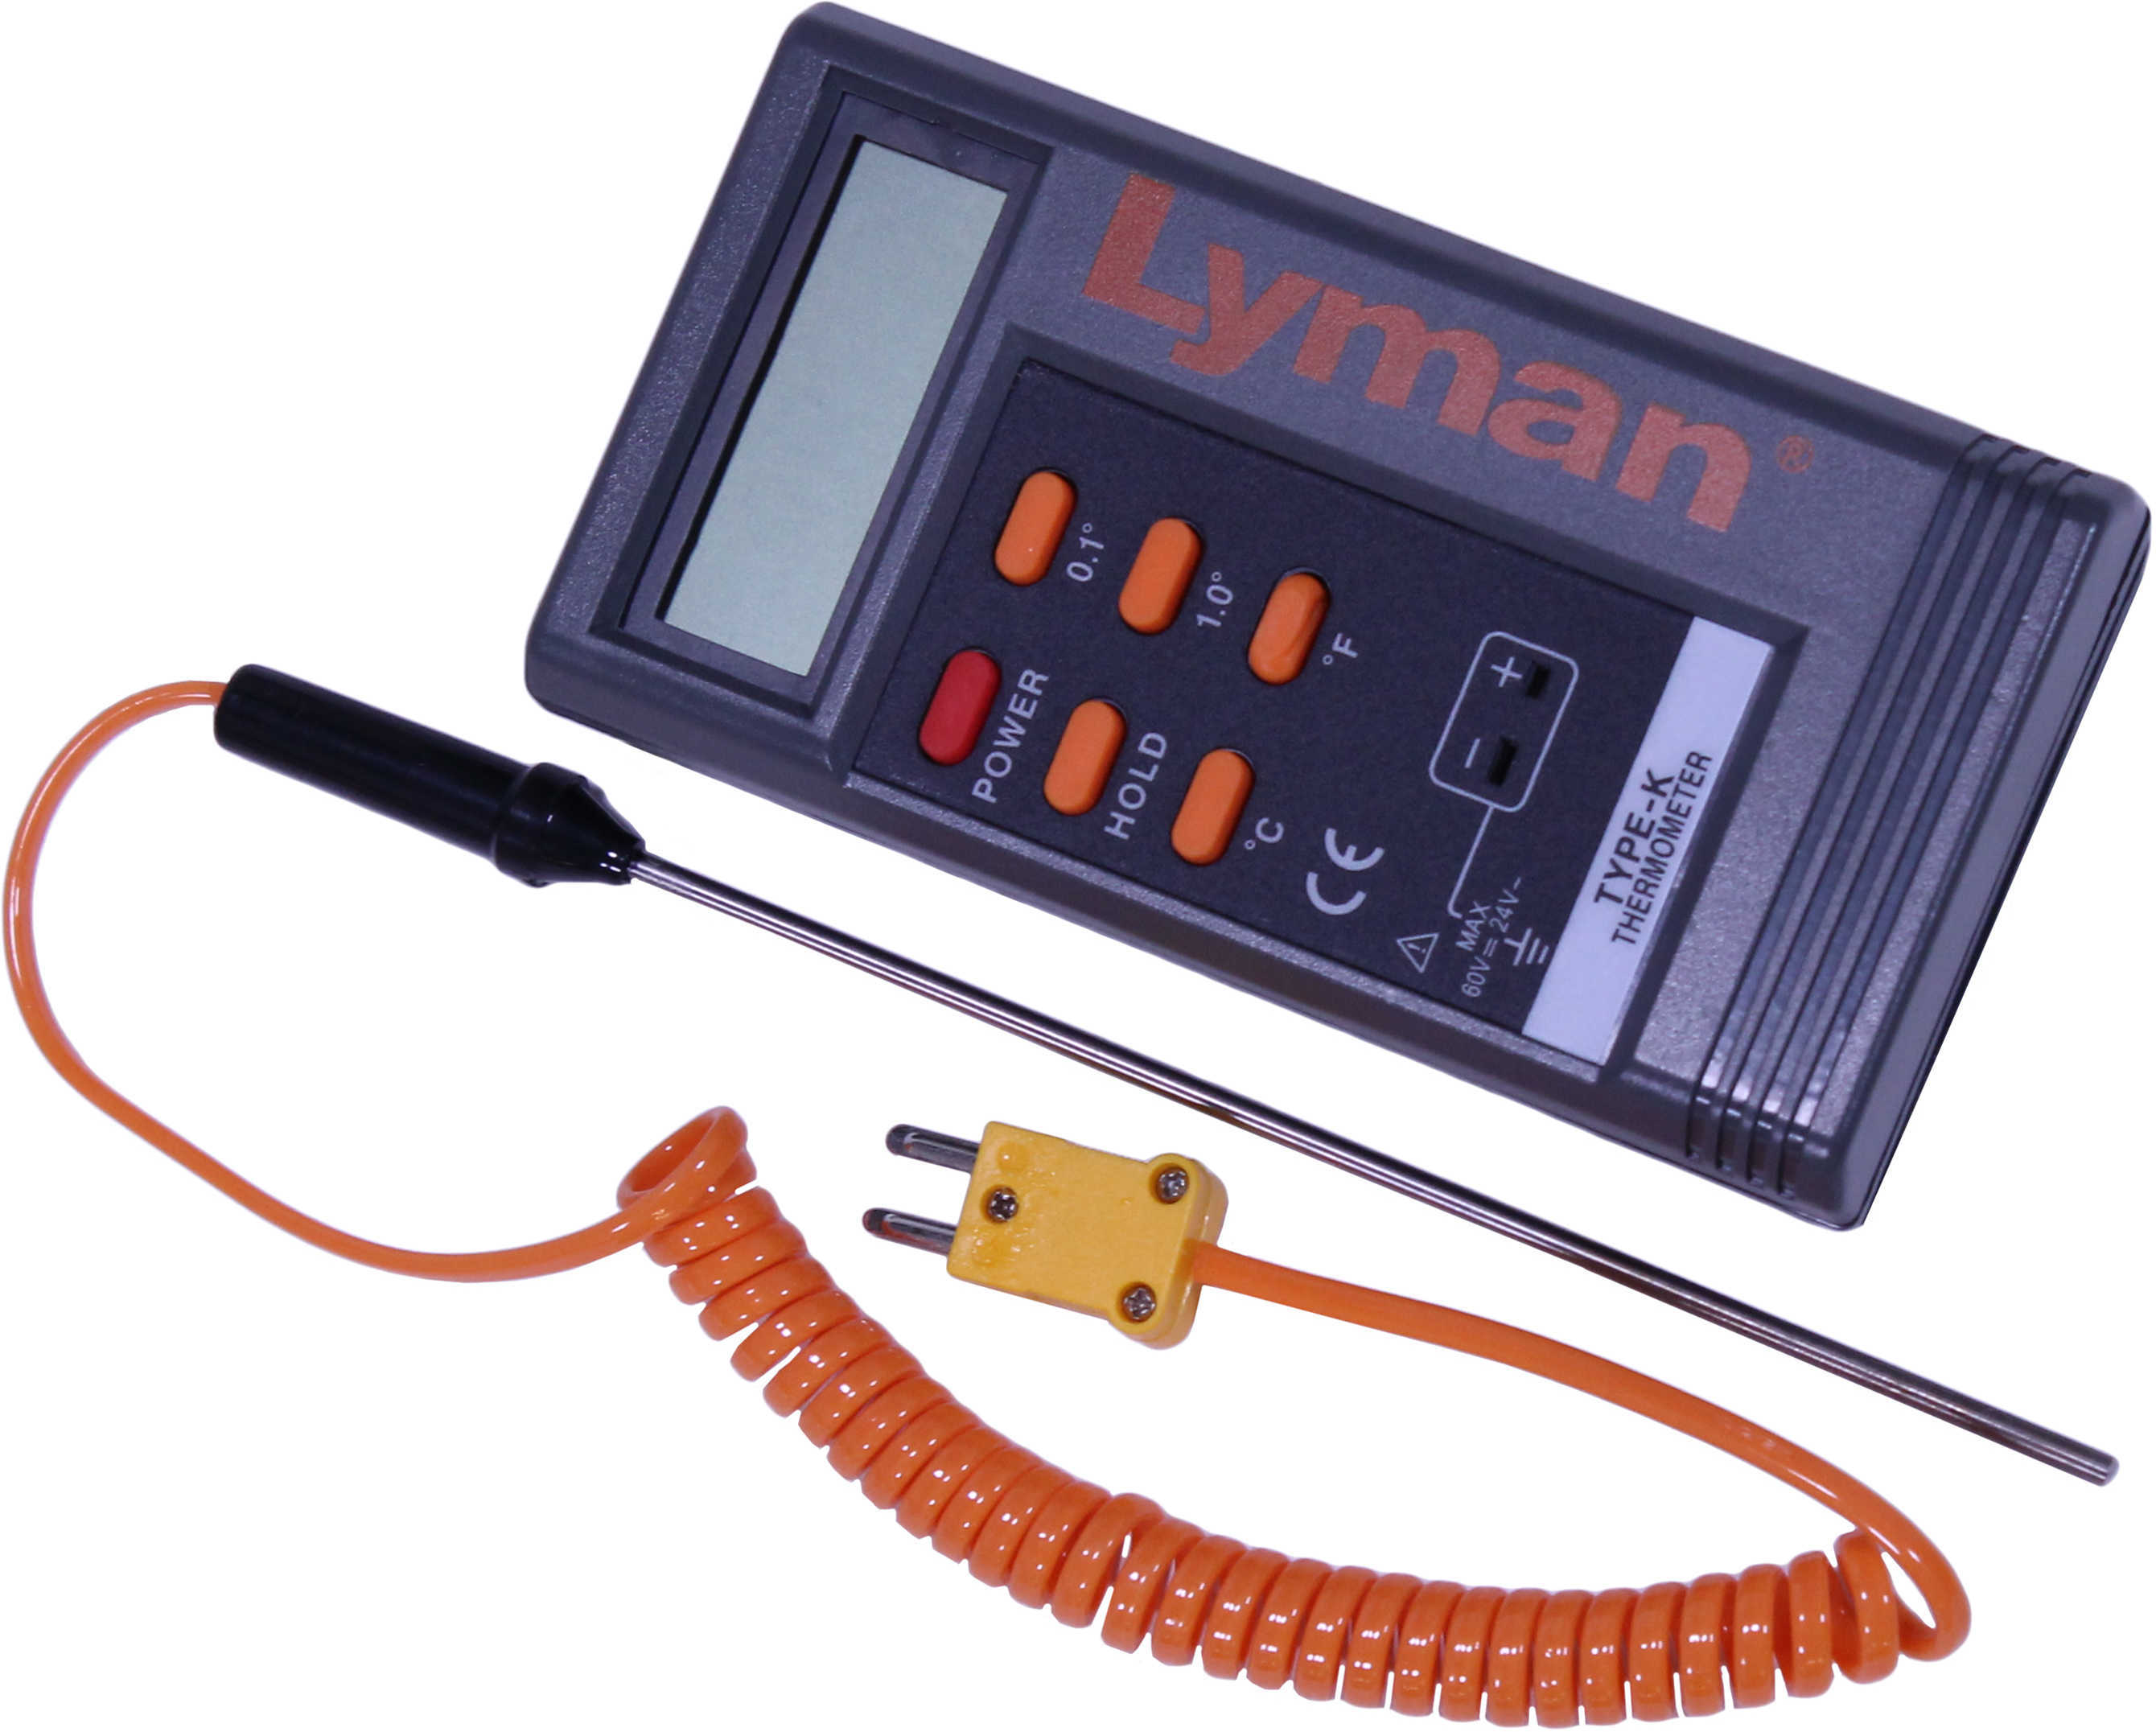 Lyman Digital Lead Thermometer 6" K-Type Thermocouple, Fahrenheit/Celsius, Md: 2867797